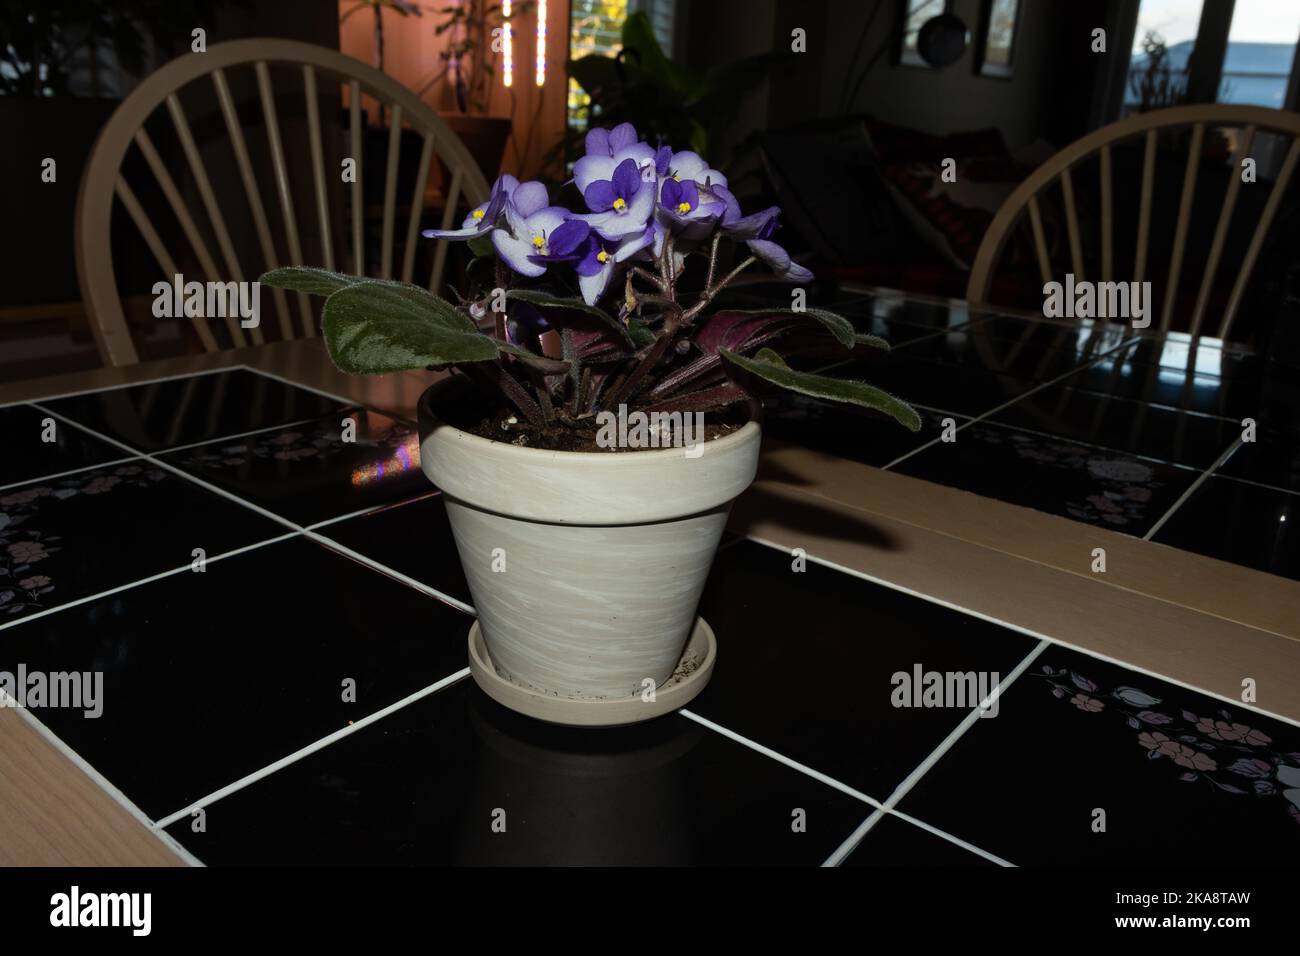 African violets take center stage on a table; unusual two-tone color Stock Photo